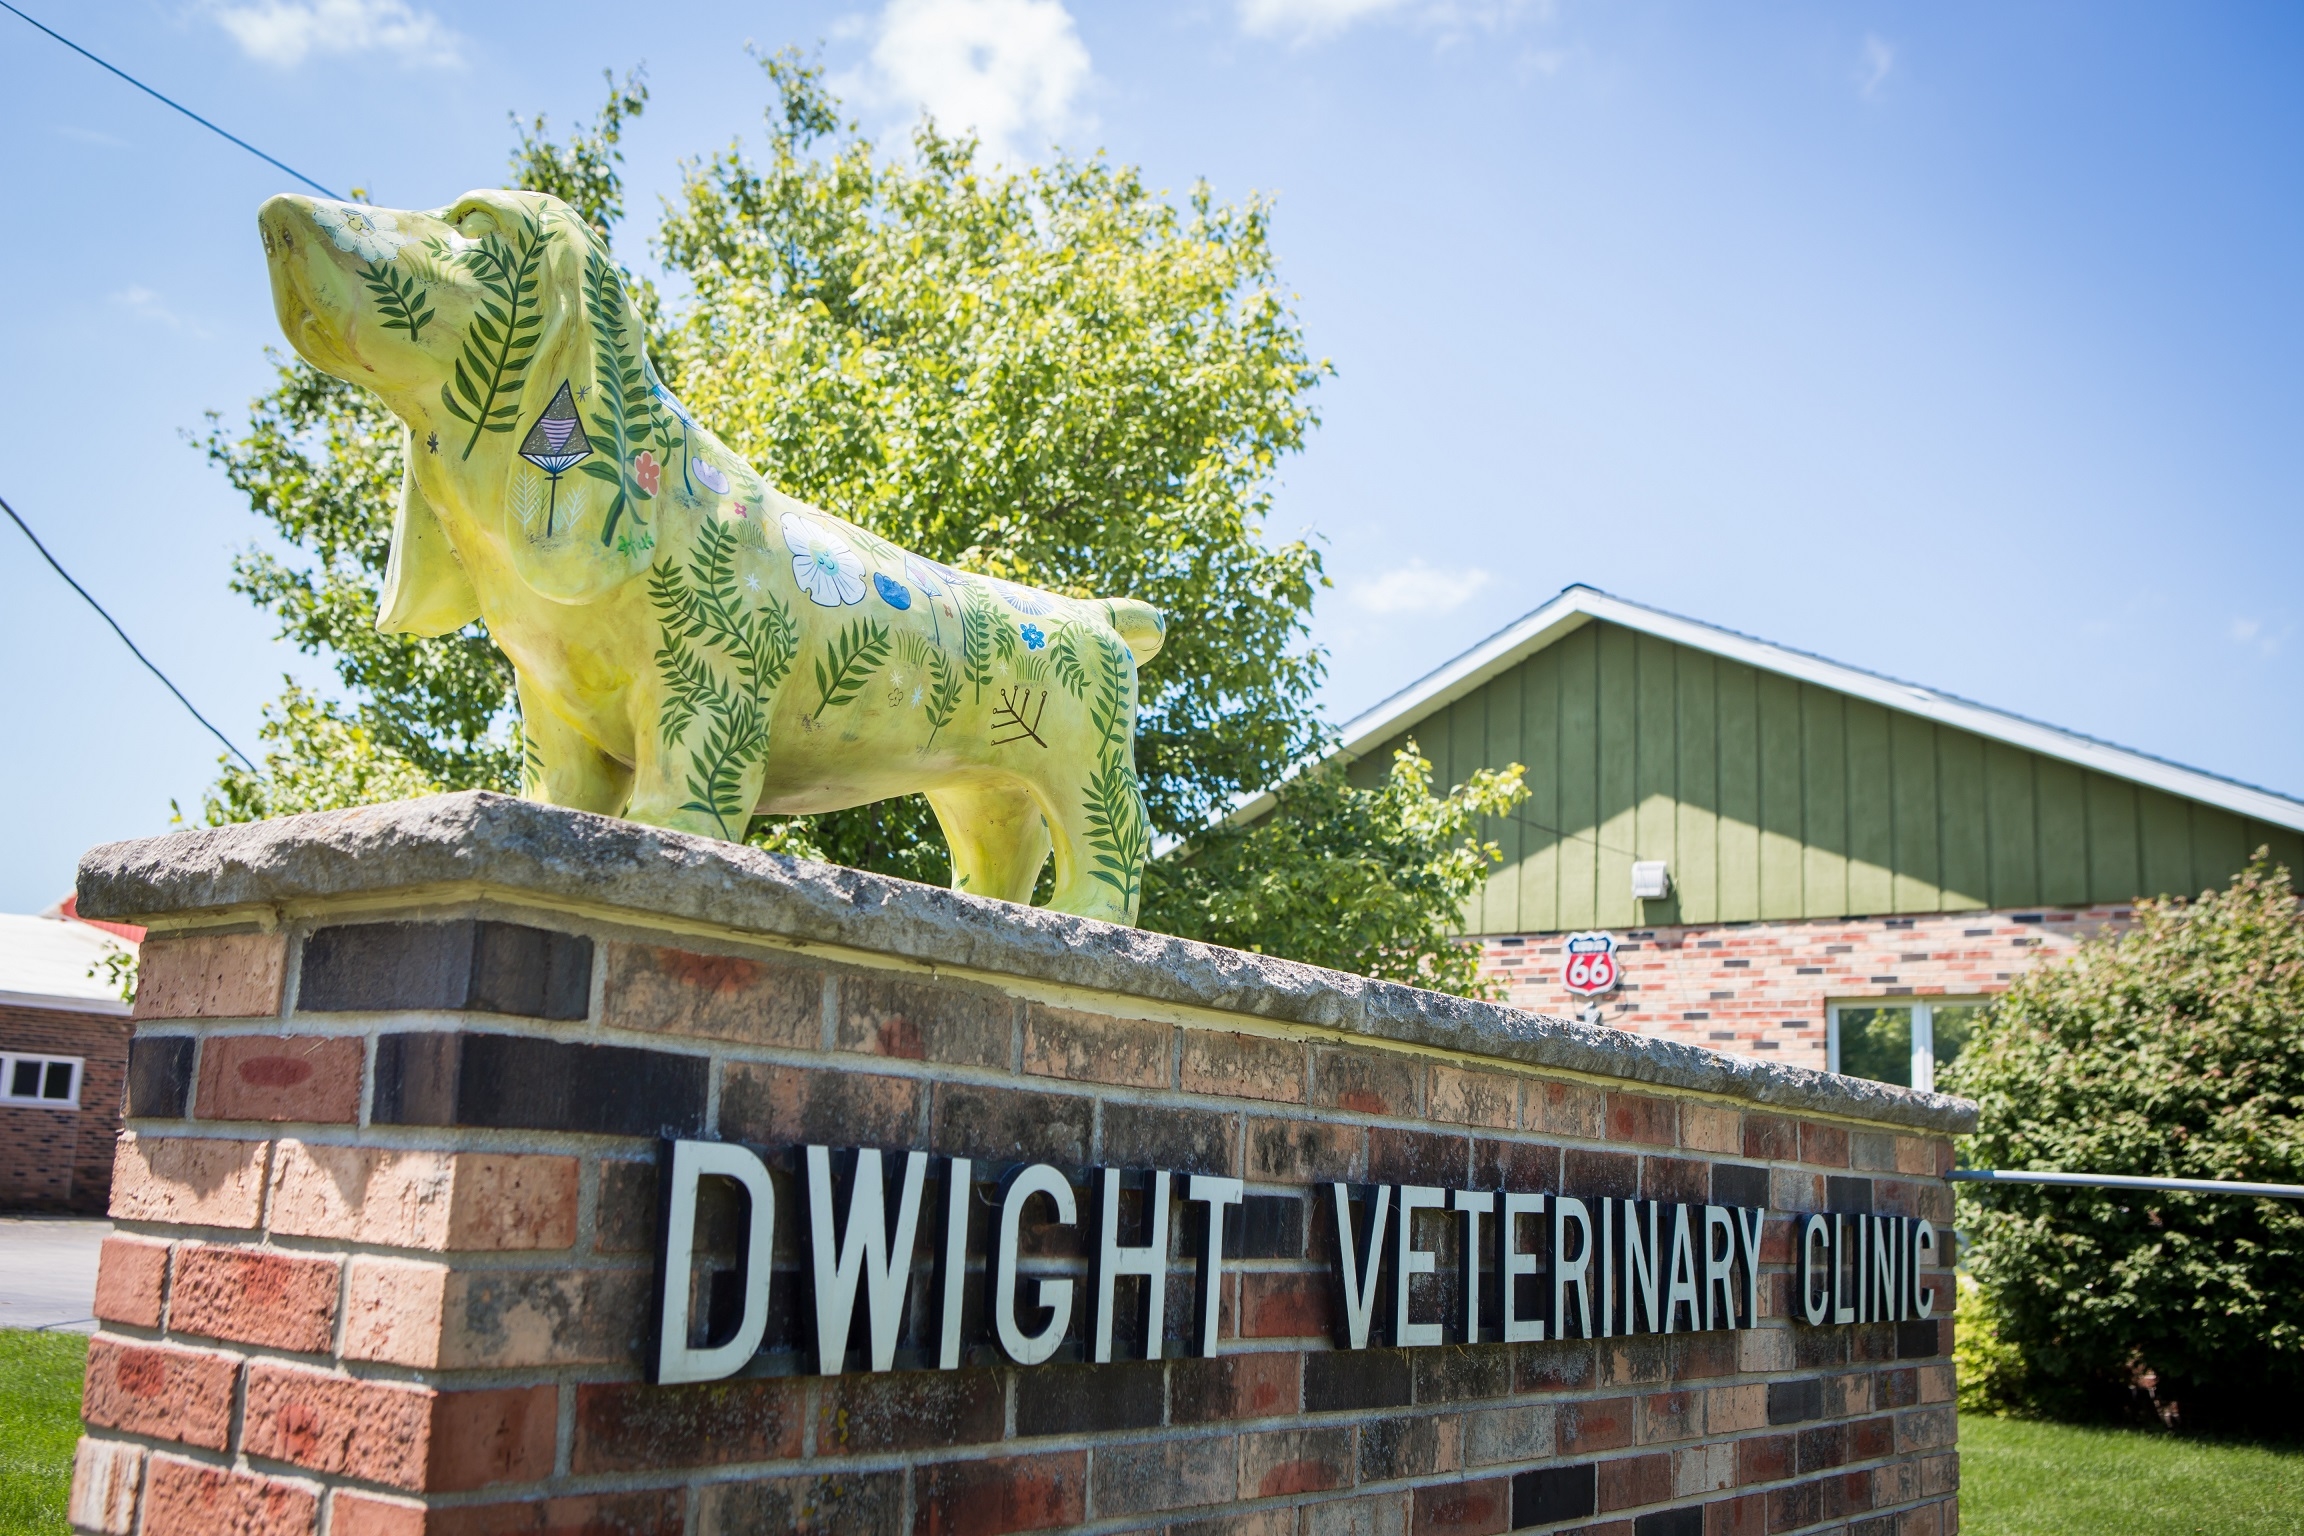 Welcome to Dwight Veterinary Clinic, where your pet's health and wellbeing is our #1 priority!